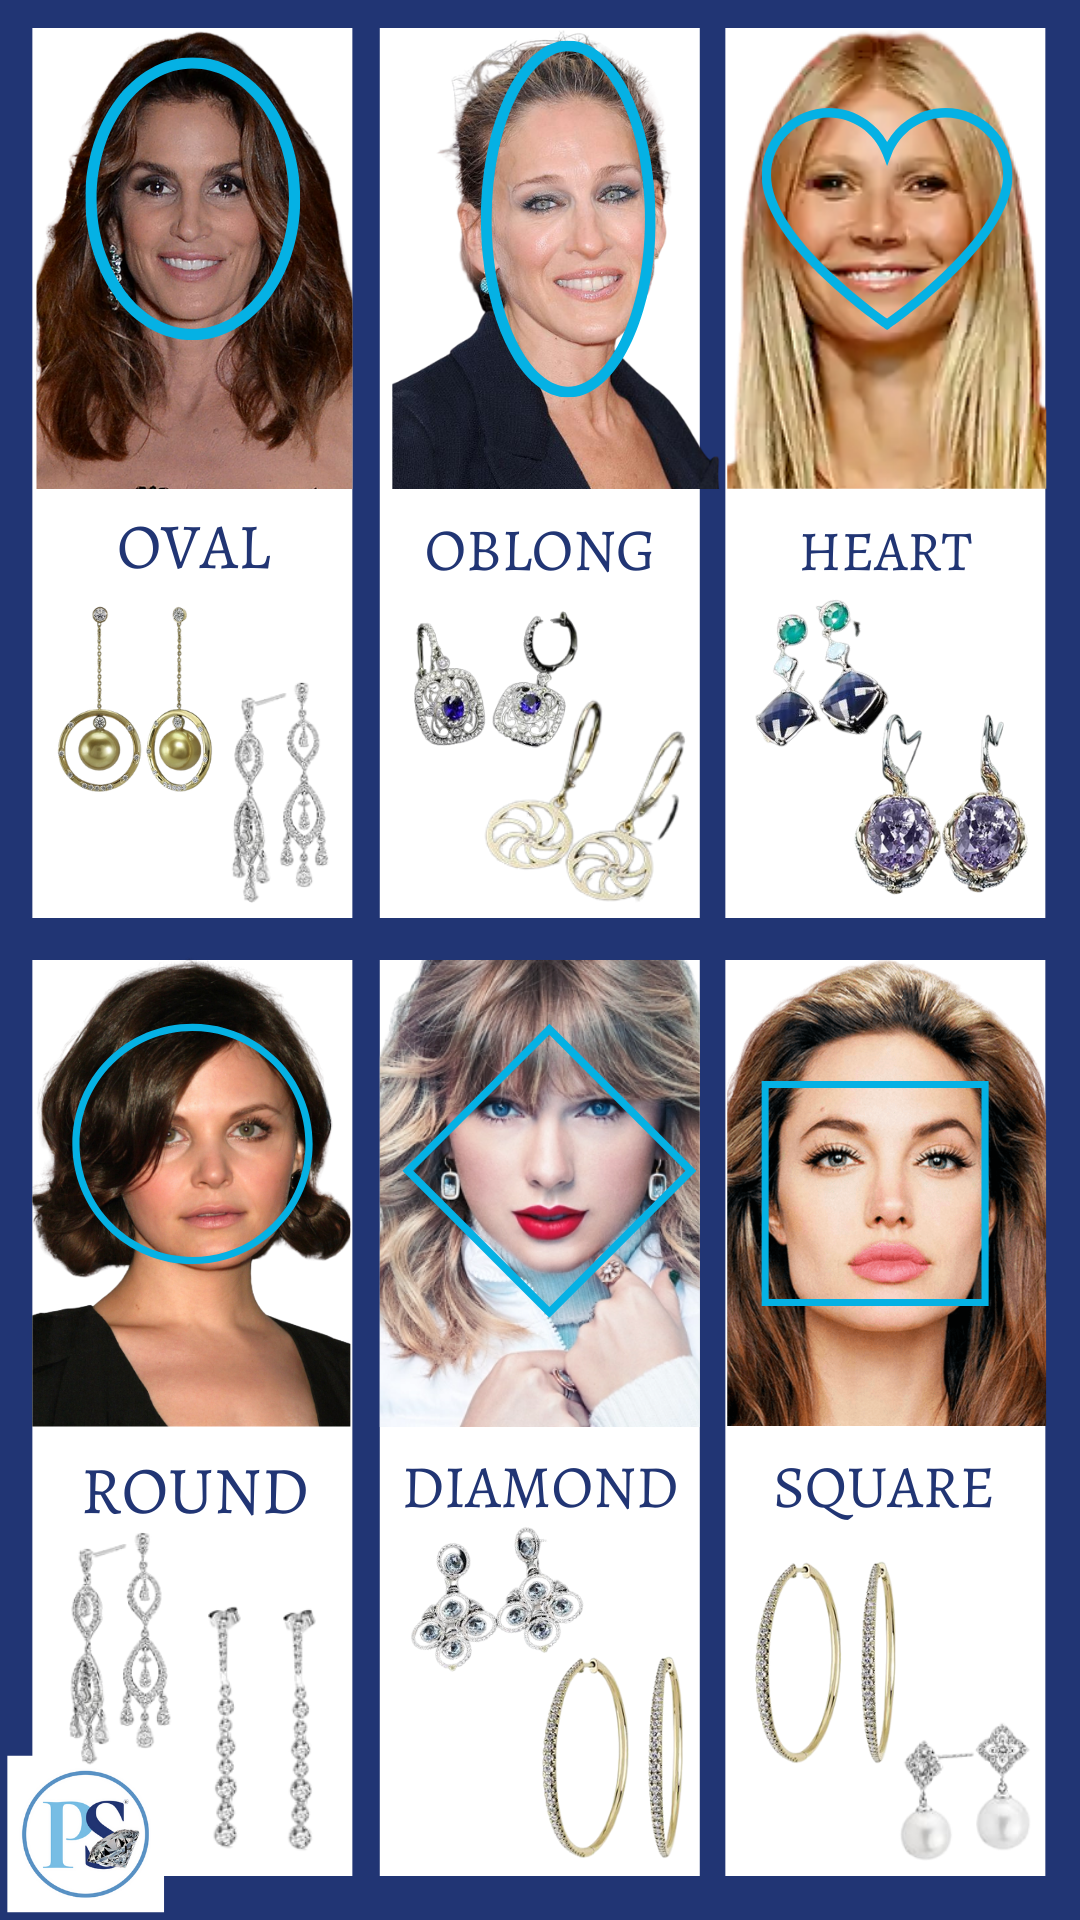 6 different celebrity faces with shapes overlaid on them, 2 pairs of corresponding earrings with each face.